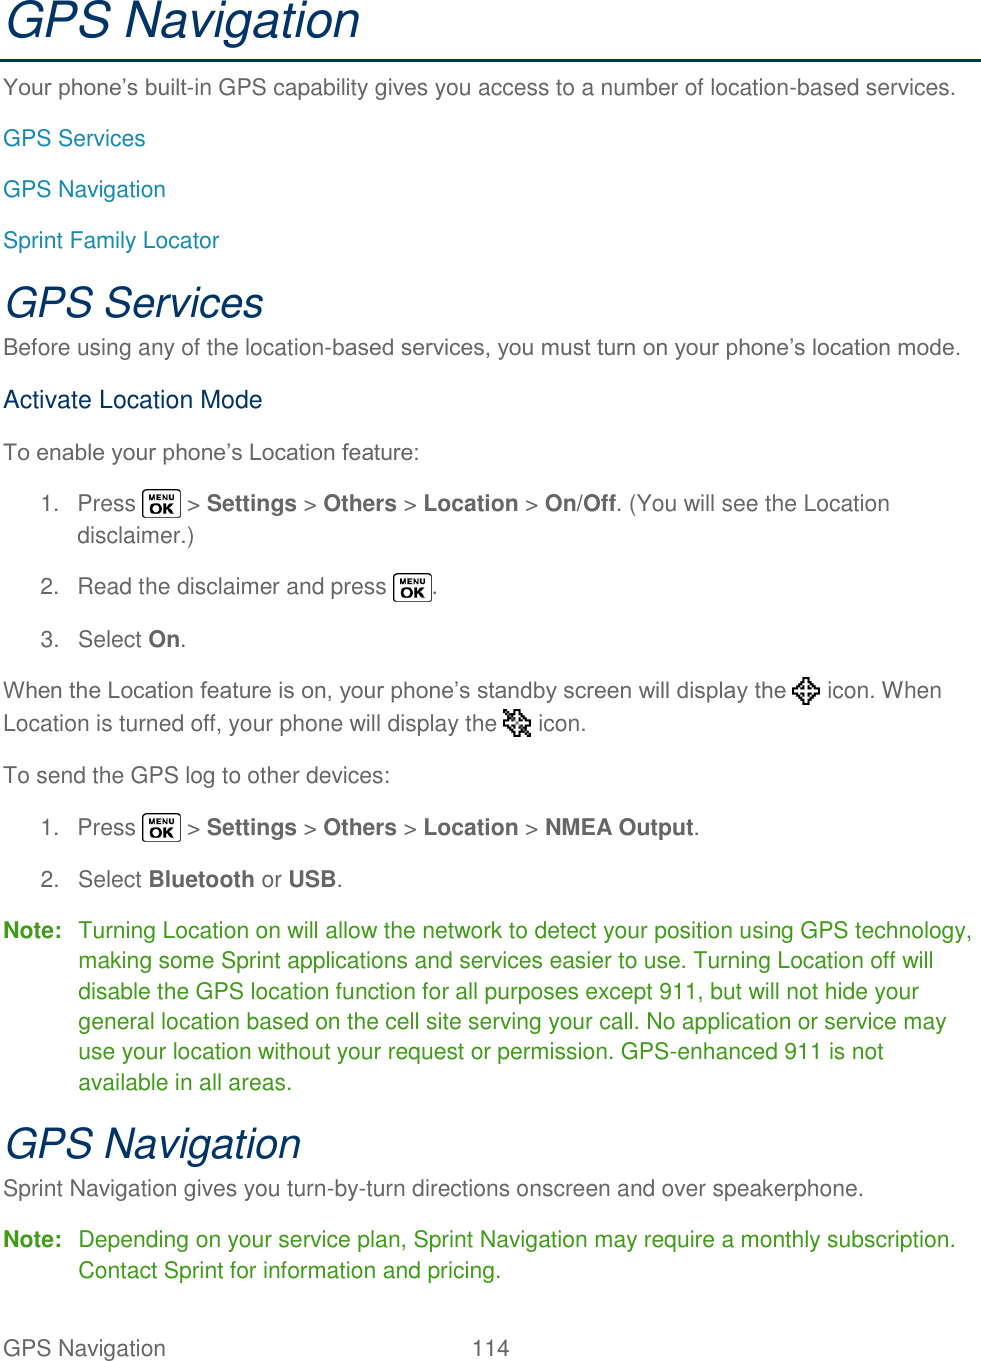  GPS Navigation   114   GPS Navigation Your phone‘s built-in GPS capability gives you access to a number of location-based services. GPS Services GPS Navigation Sprint Family Locator GPS Services Before using any of the location-based services, you must turn on your phone‘s location mode. Activate Location Mode To enable your phone‘s Location feature: 1.  Press   &gt; Settings &gt; Others &gt; Location &gt; On/Off. (You will see the Location disclaimer.) 2.  Read the disclaimer and press  . 3.  Select On. When the Location feature is on, your phone‘s standby screen will display the   icon. When Location is turned off, your phone will display the   icon. To send the GPS log to other devices: 1.  Press   &gt; Settings &gt; Others &gt; Location &gt; NMEA Output. 2.  Select Bluetooth or USB. Note:  Turning Location on will allow the network to detect your position using GPS technology, making some Sprint applications and services easier to use. Turning Location off will disable the GPS location function for all purposes except 911, but will not hide your general location based on the cell site serving your call. No application or service may use your location without your request or permission. GPS-enhanced 911 is not available in all areas. GPS Navigation Sprint Navigation gives you turn-by-turn directions onscreen and over speakerphone. Note:  Depending on your service plan, Sprint Navigation may require a monthly subscription. Contact Sprint for information and pricing. 